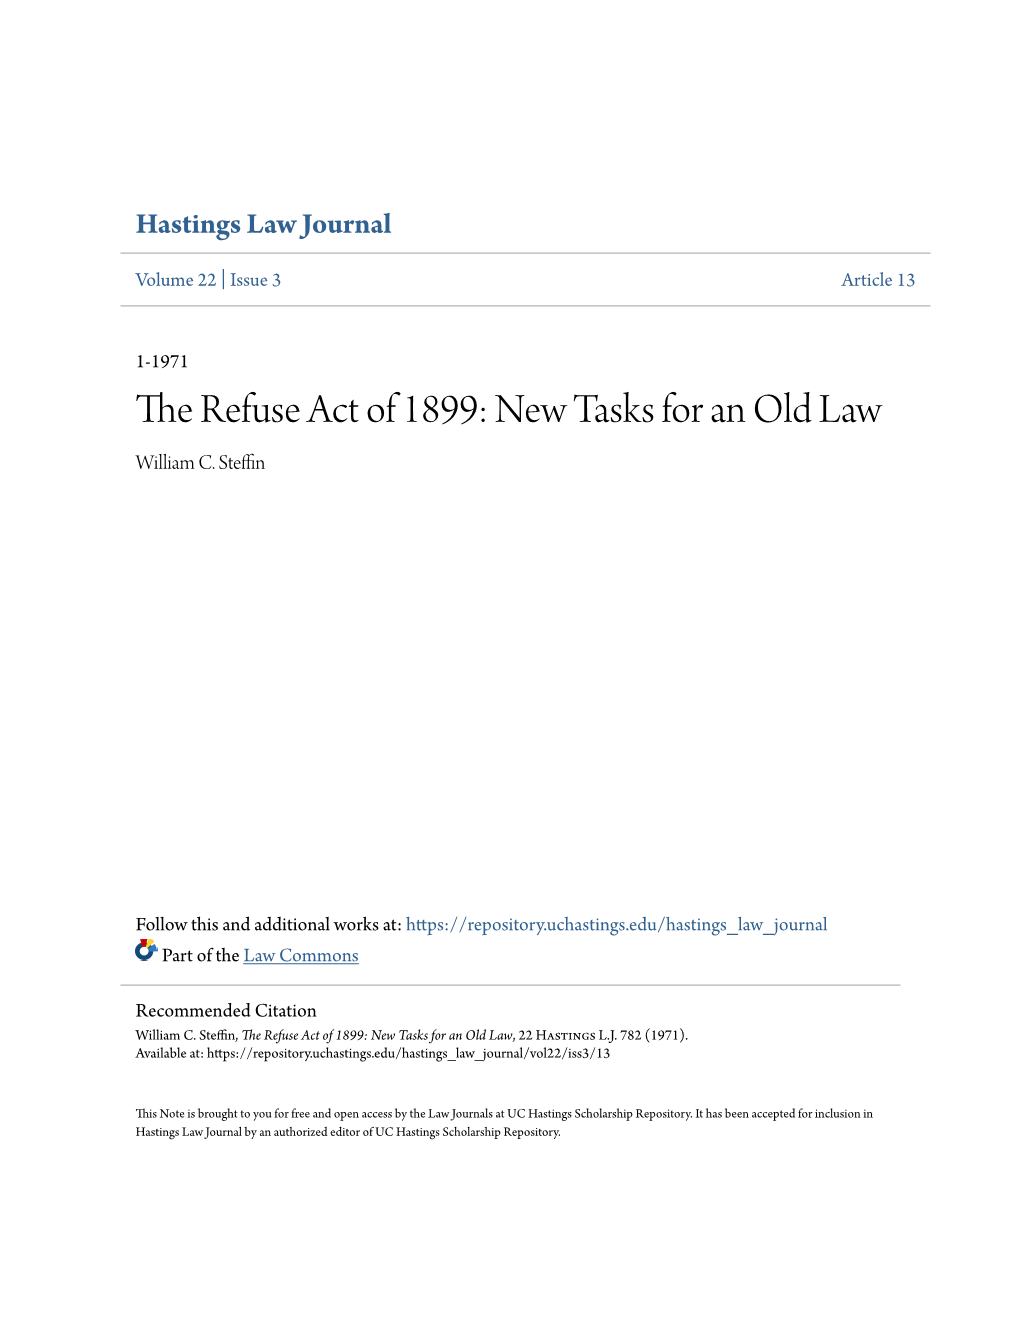 The Refuse Act of 1899: New Tasks for an Old Law William C